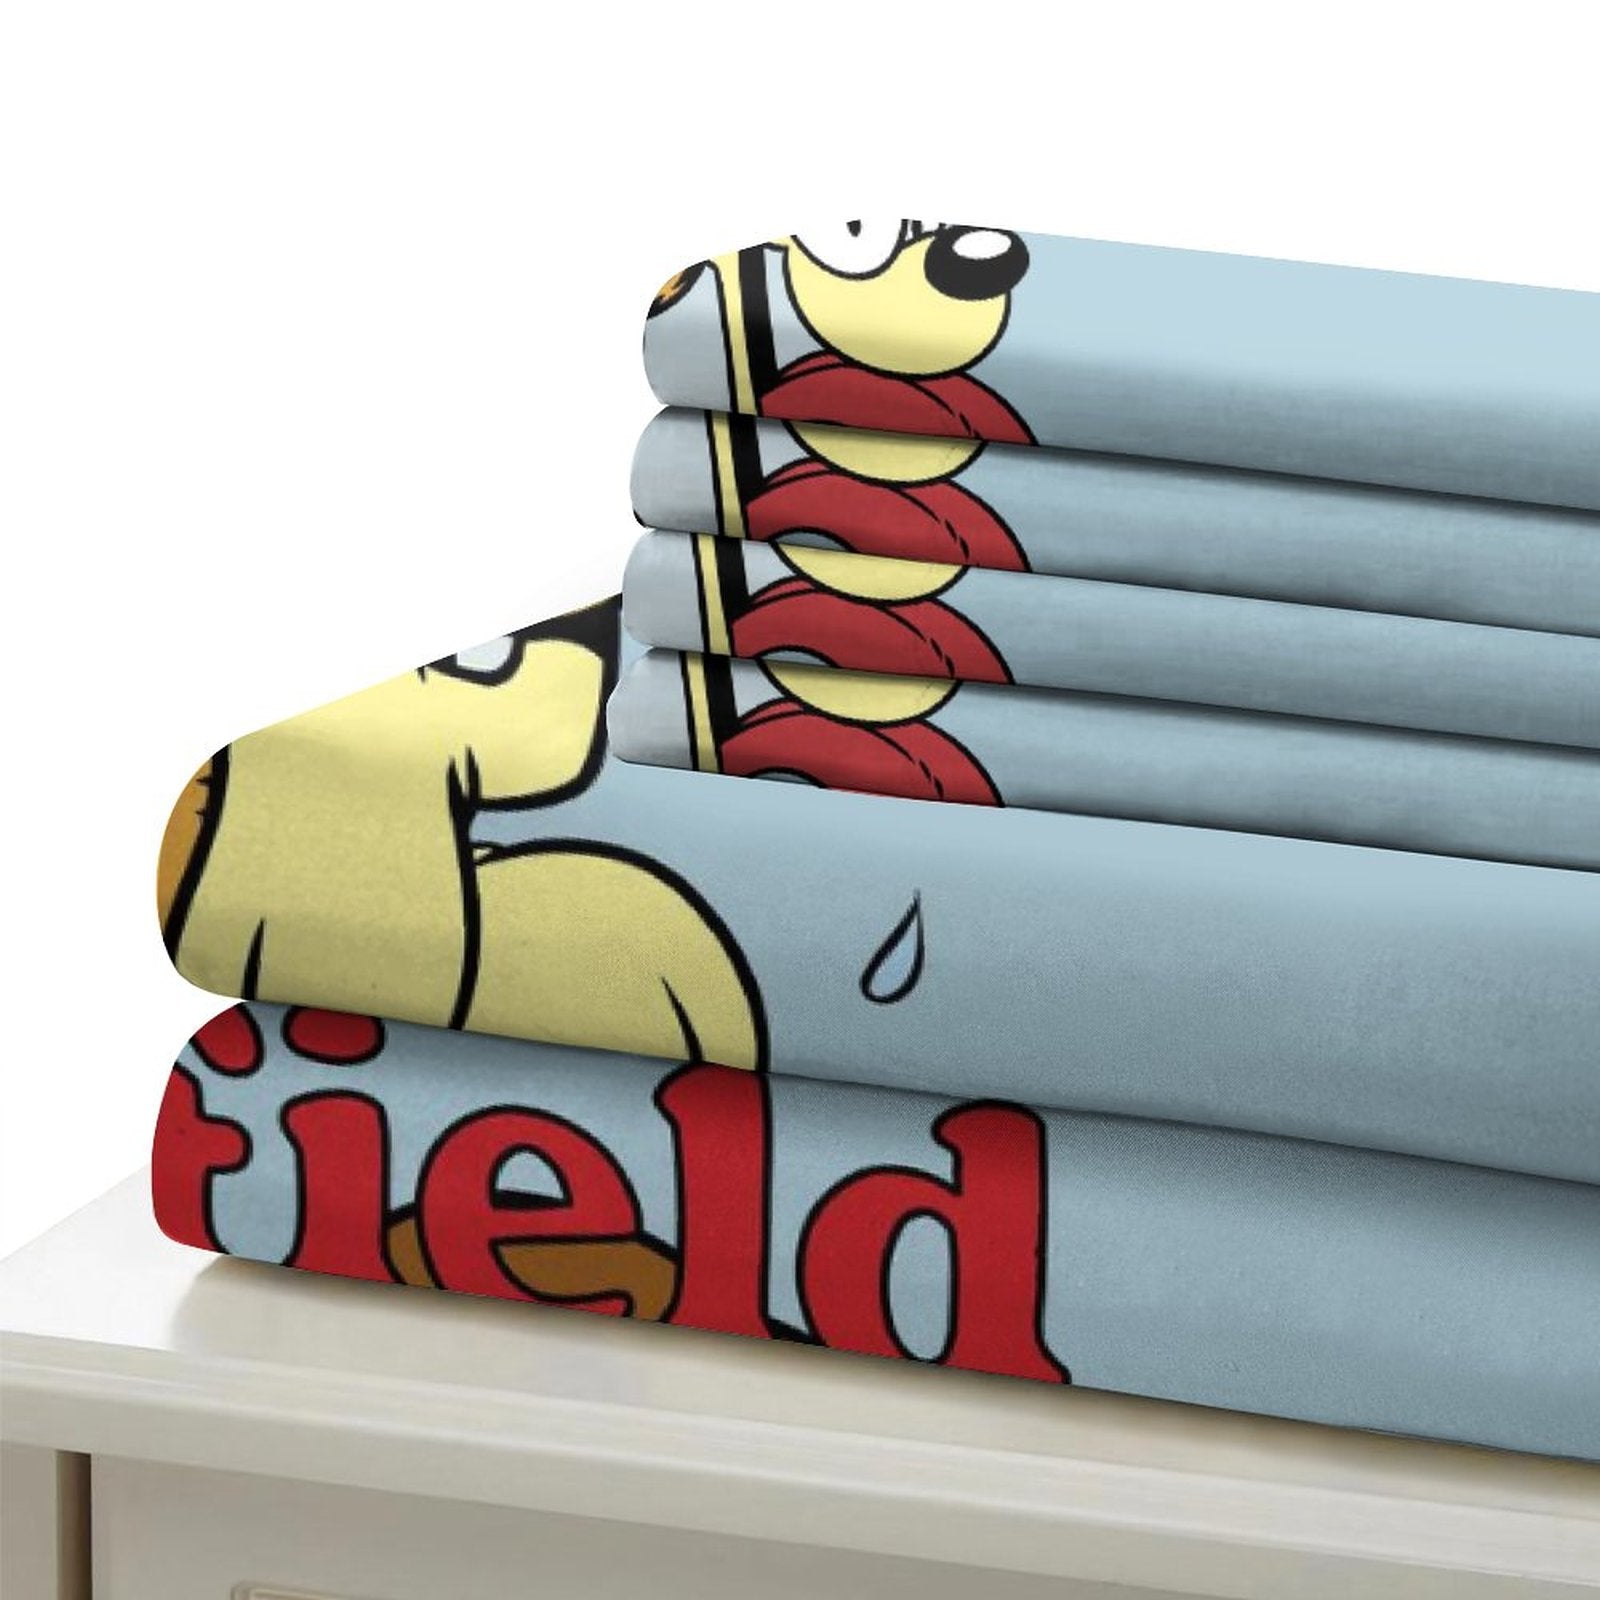 2024 NEW Garfield Bedding Set Quilt Cover Without Filler